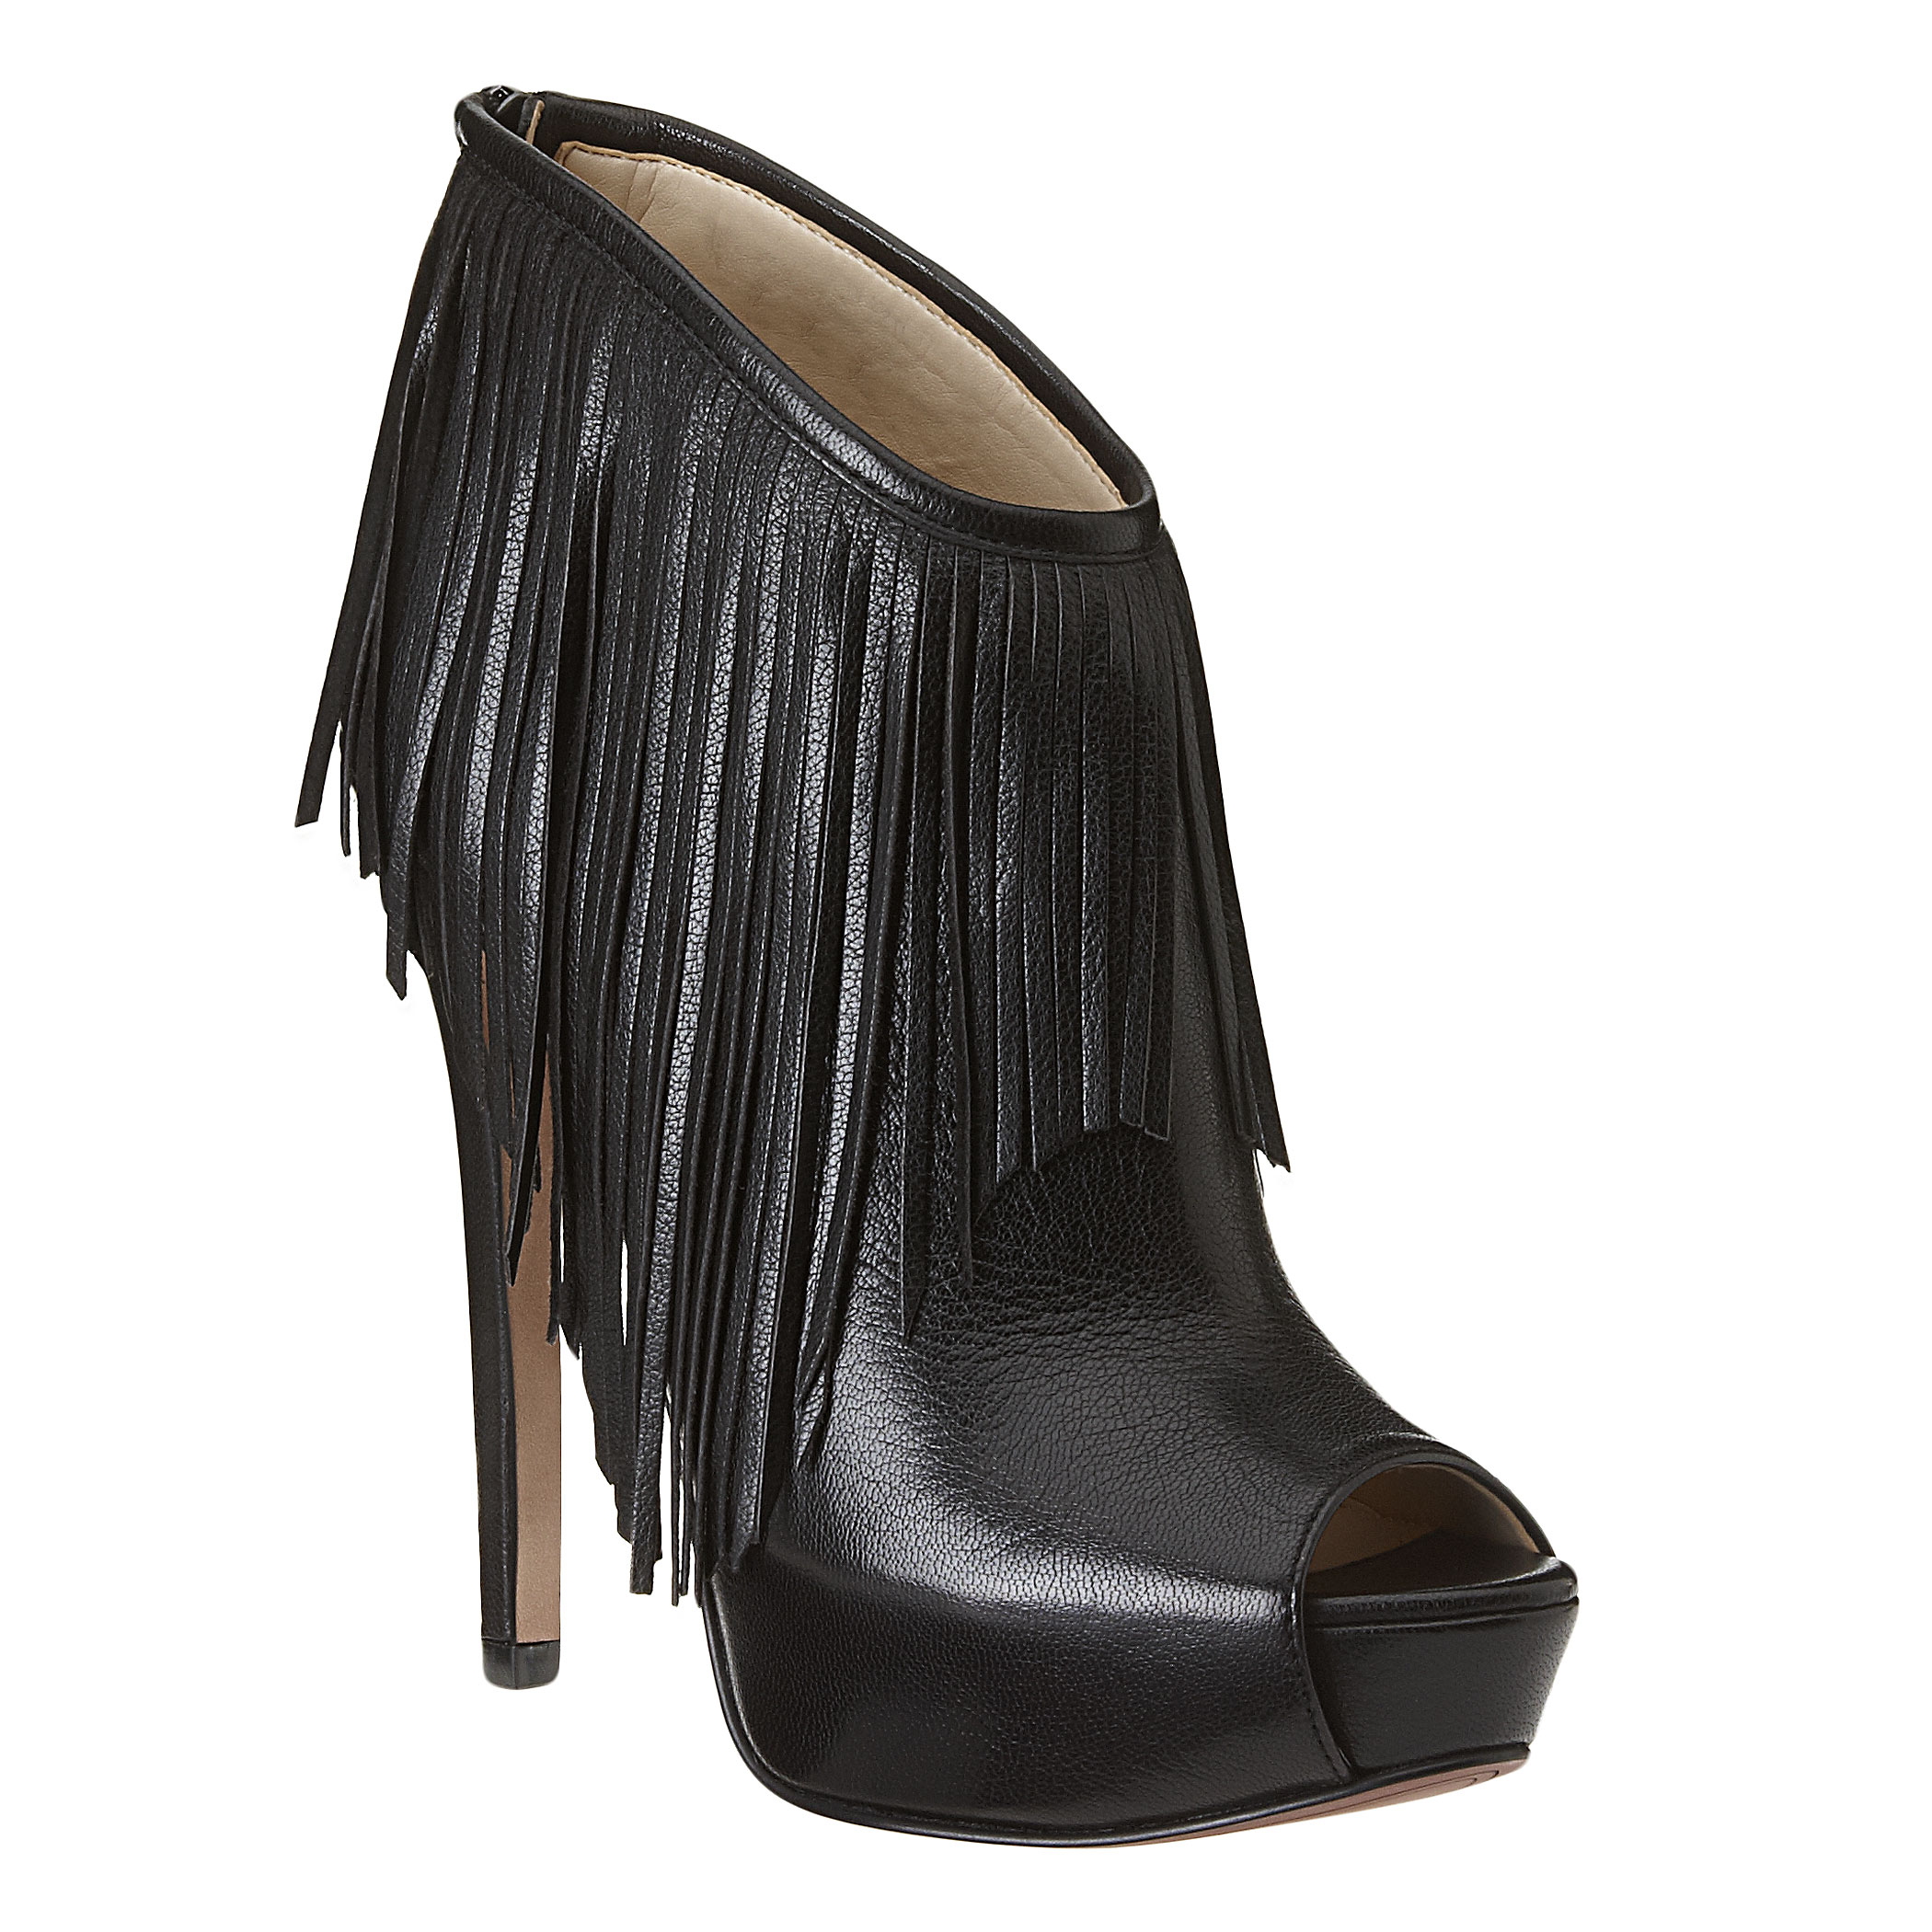 opened up my email and these fringe peep-toe booties were staring ...